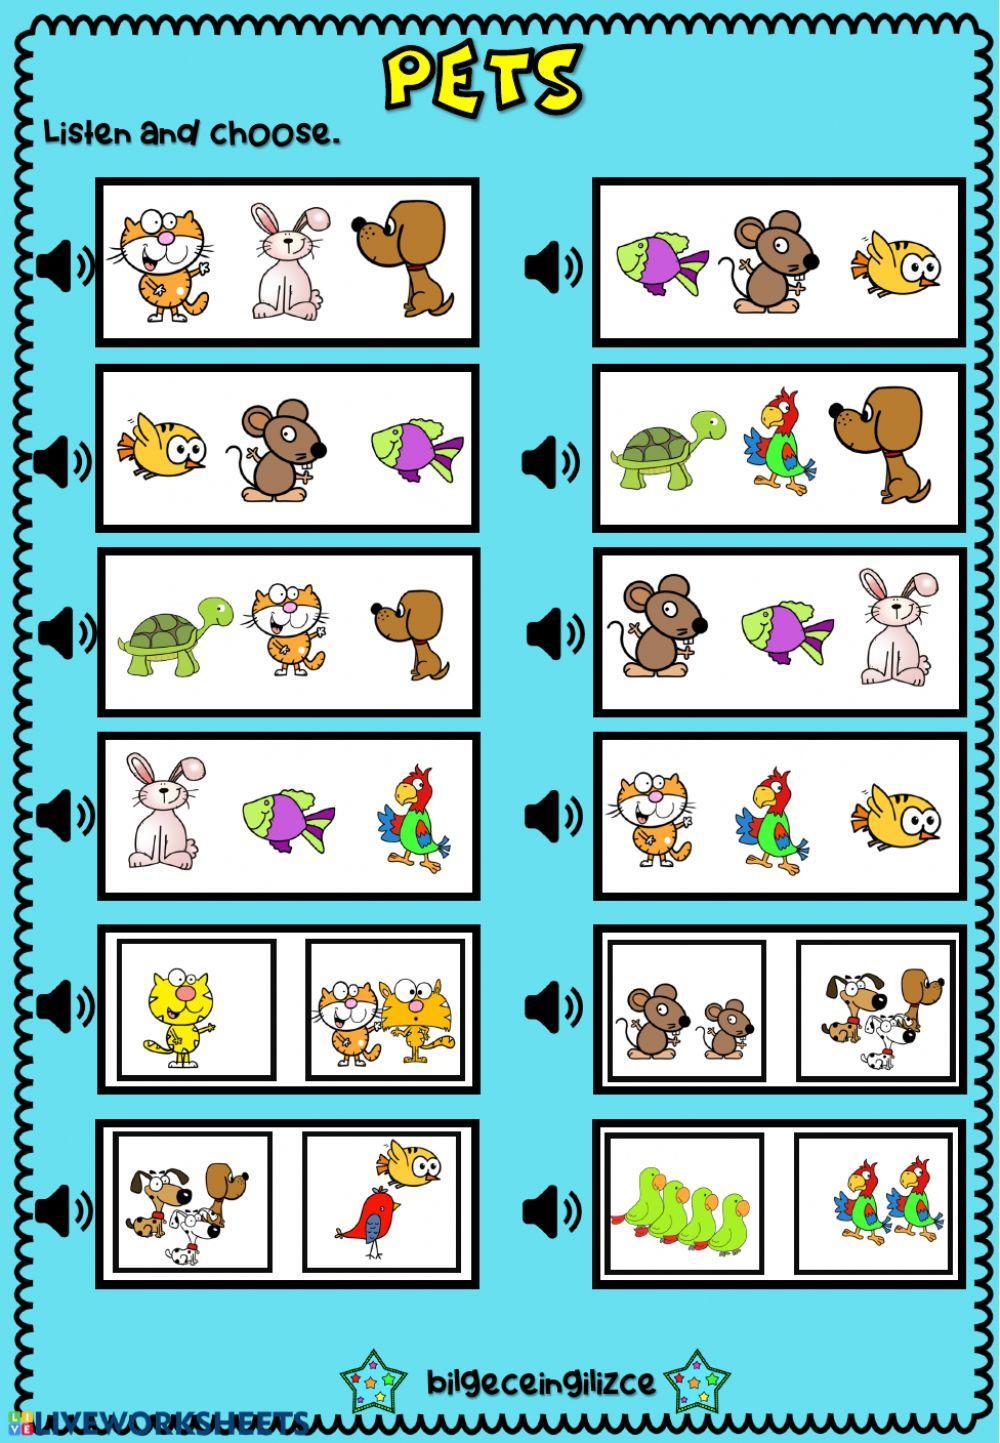 Keeping pets listen. Pets ESL. Pets in English. My Pet Worksheets for Kids. ESL Pets photos.